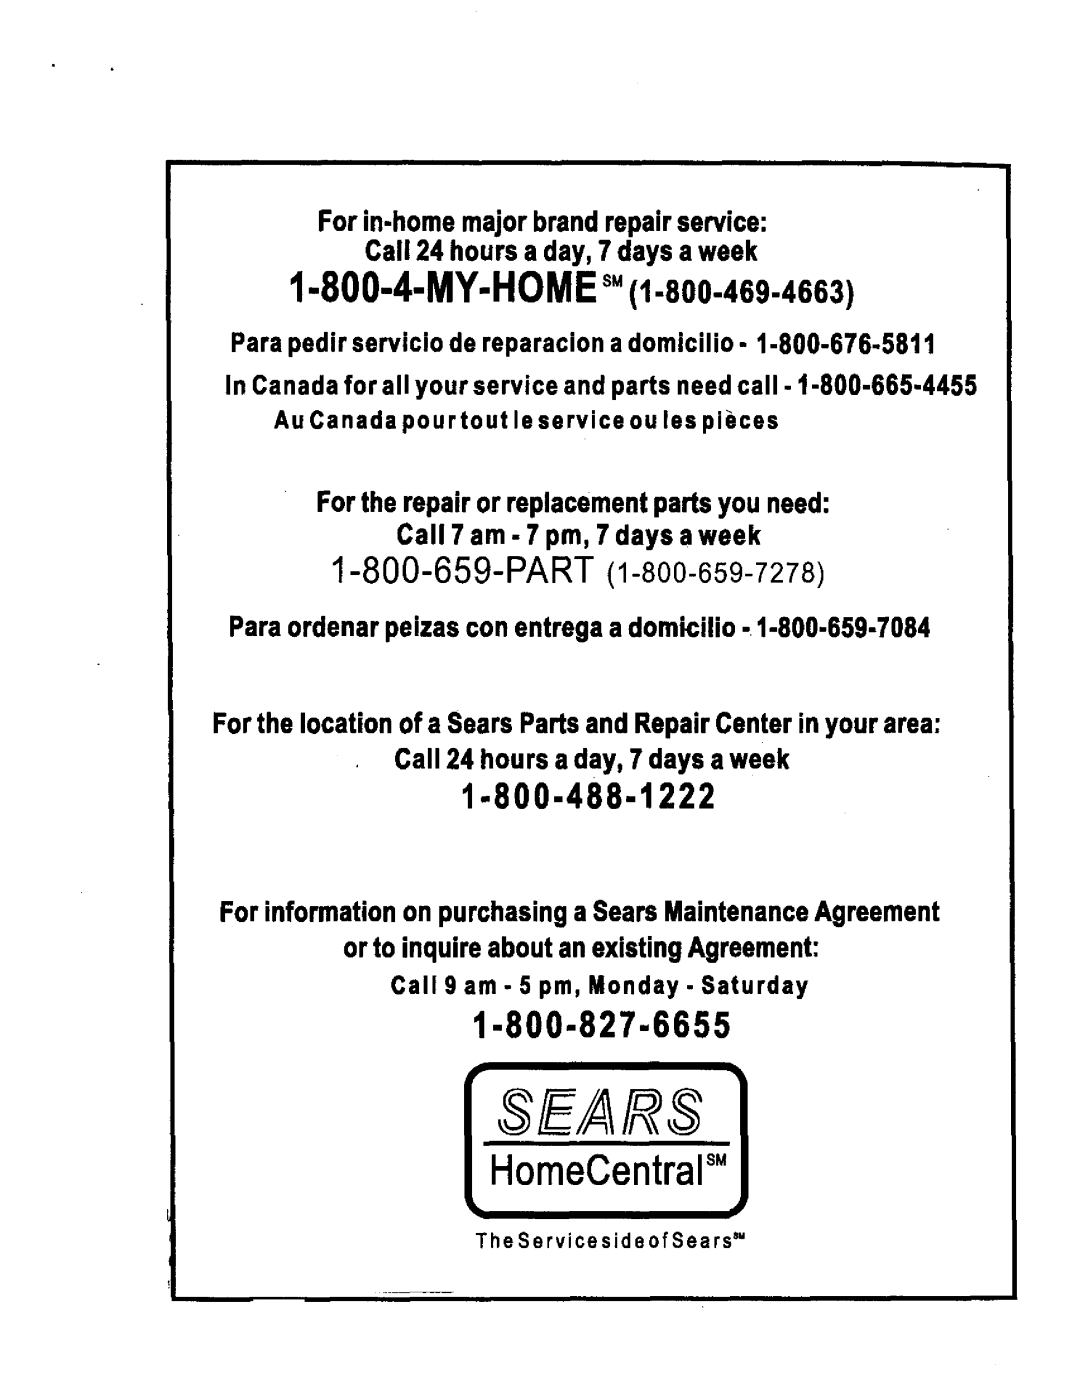 Sears JH4000, 142.288040 operating instructions Sears, MY-HOMEs.1-800-469-4663, HomeCentral 